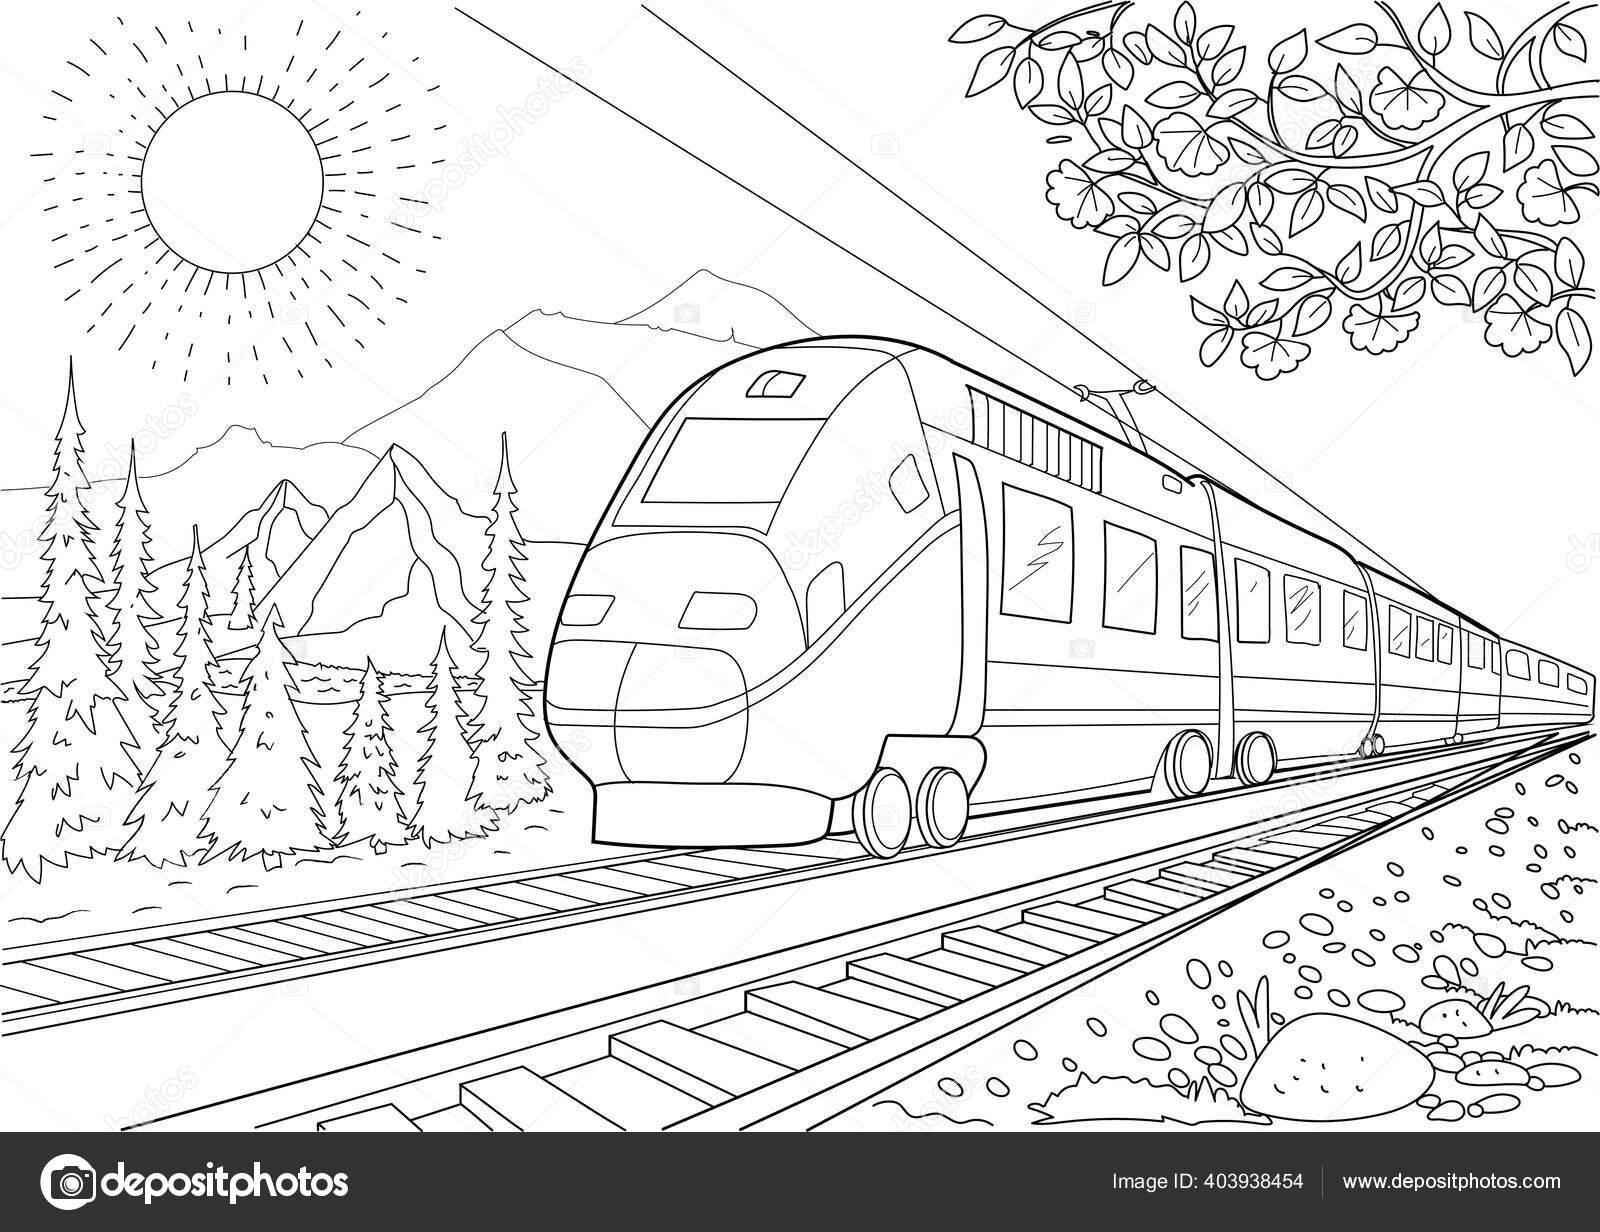 Model train railroad coloring page mountains stock vector by zolgagmail